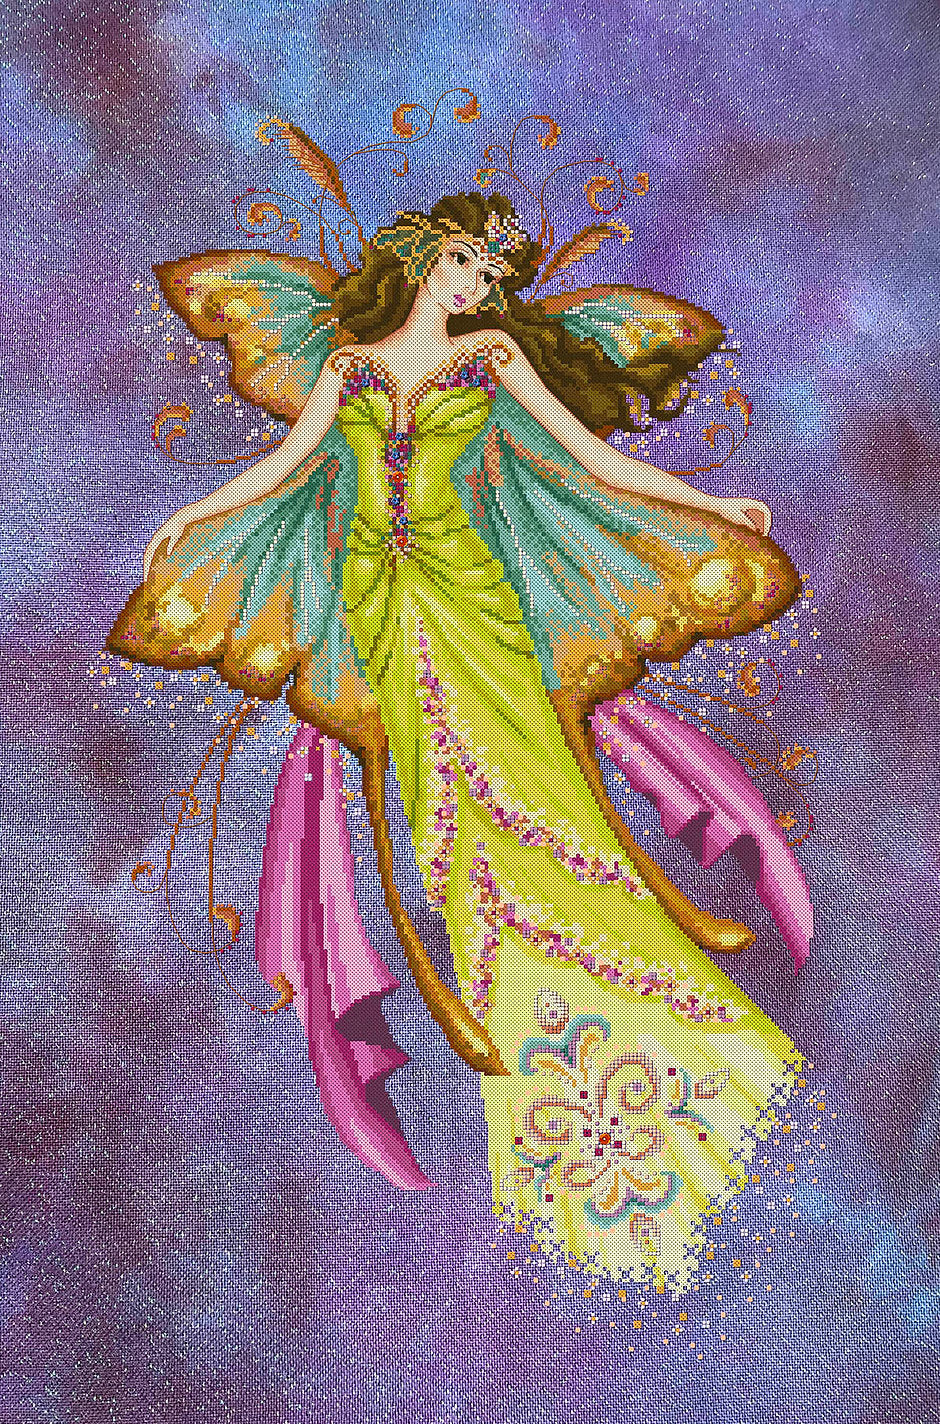 Ascent of the Moth Queen - Bella Filipina - Cross stitch chart BF028